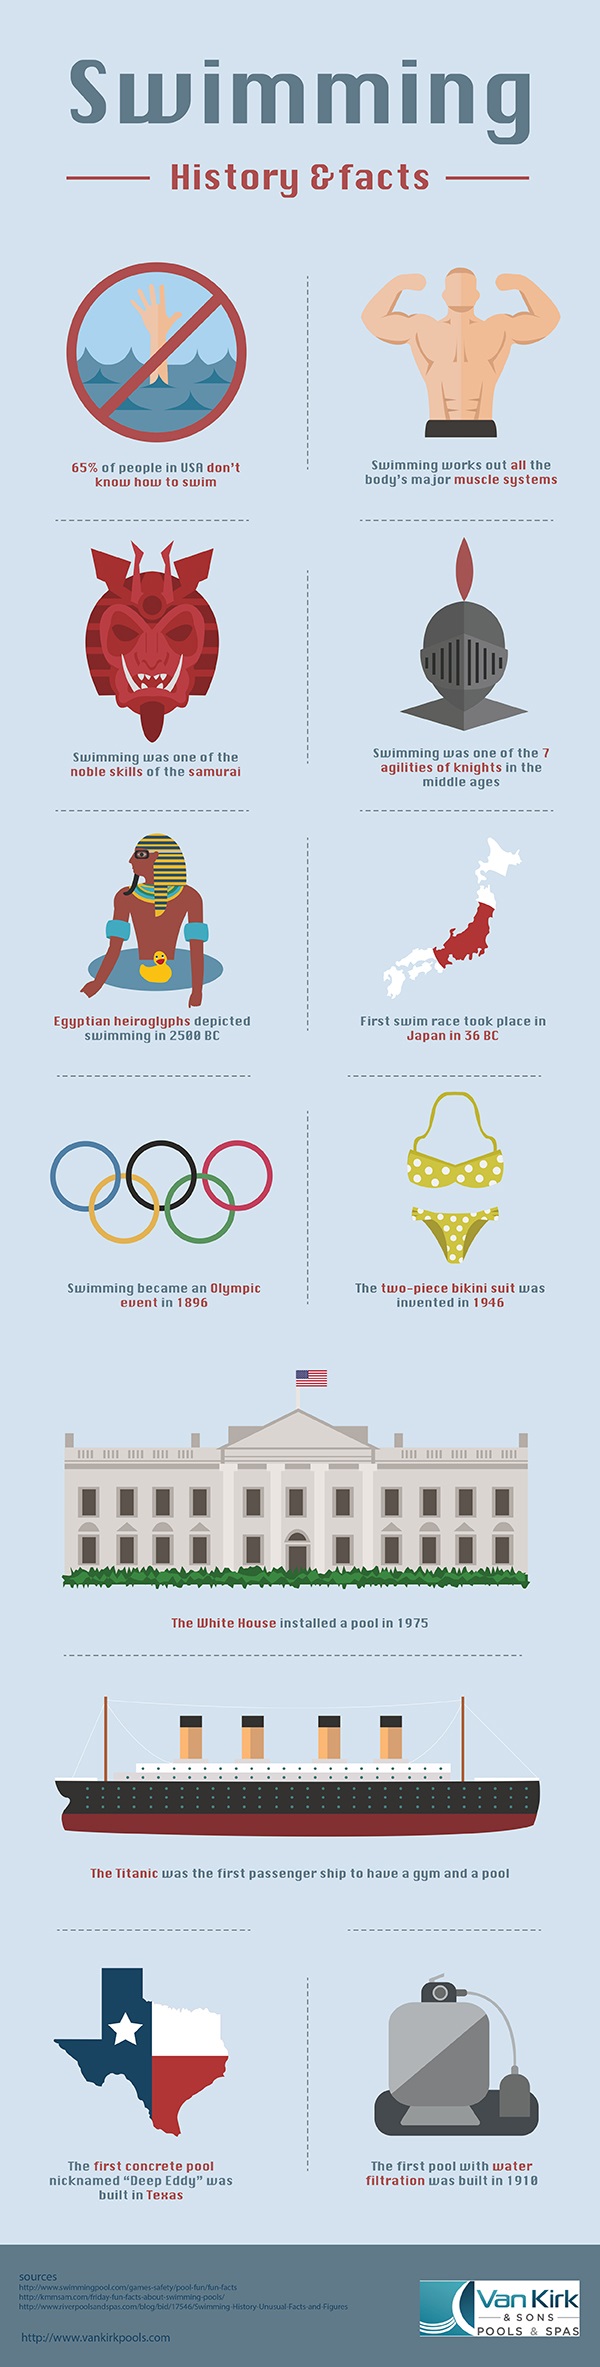 swimming facts infographic